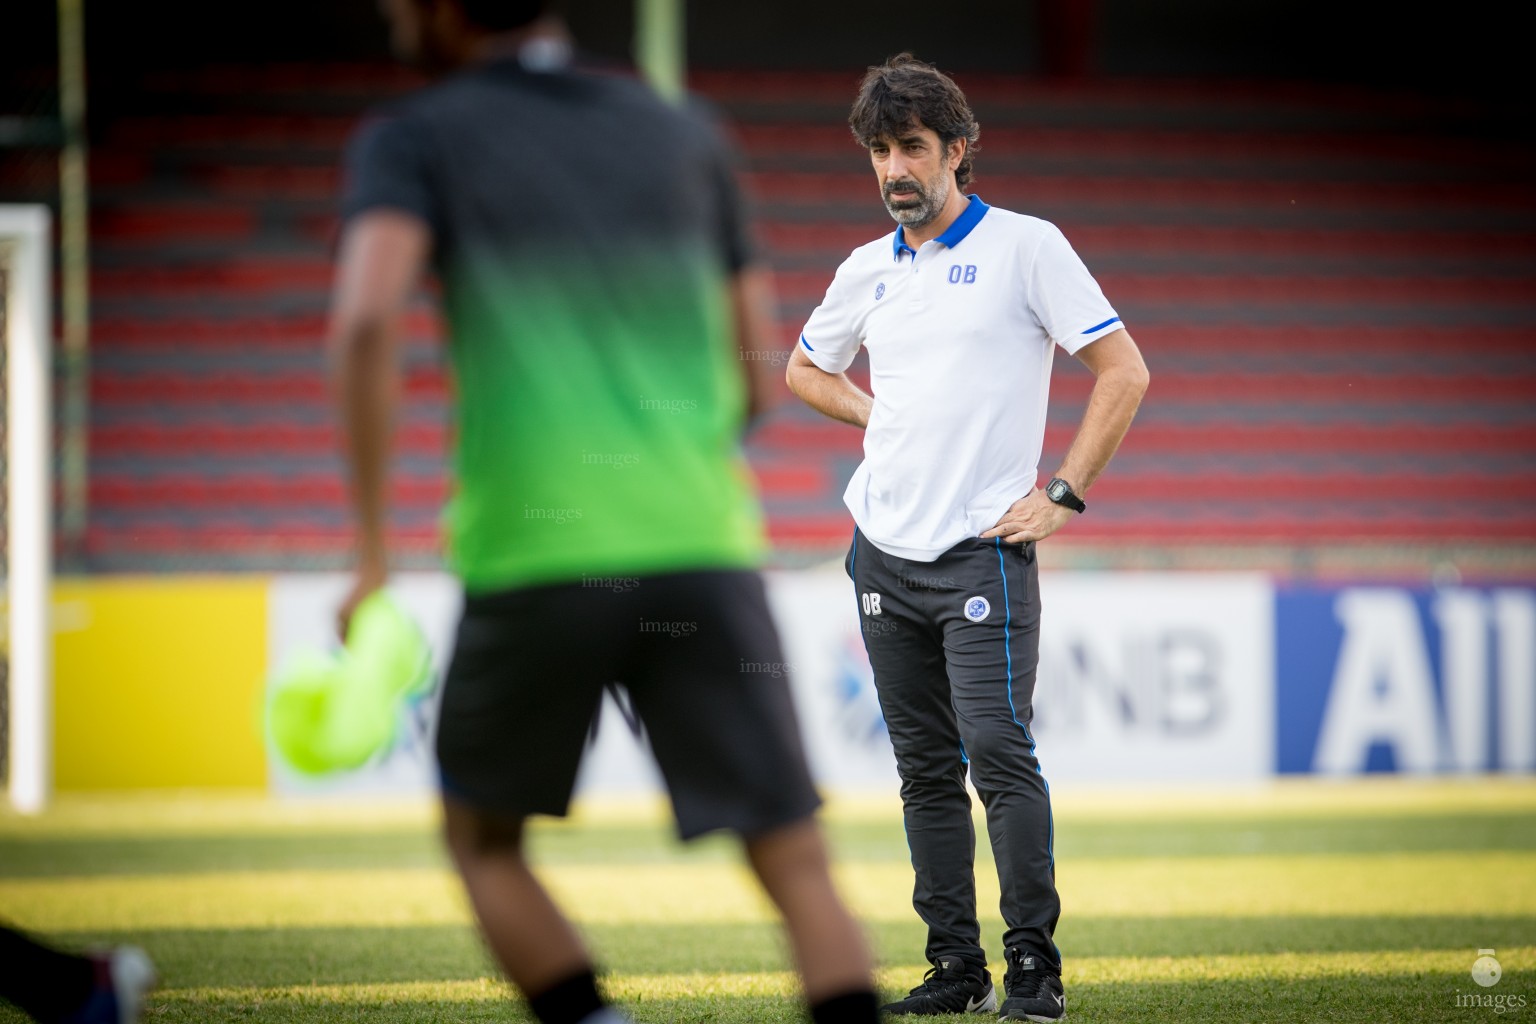 New Radiant SC Practice Session for AFC Cup 2018